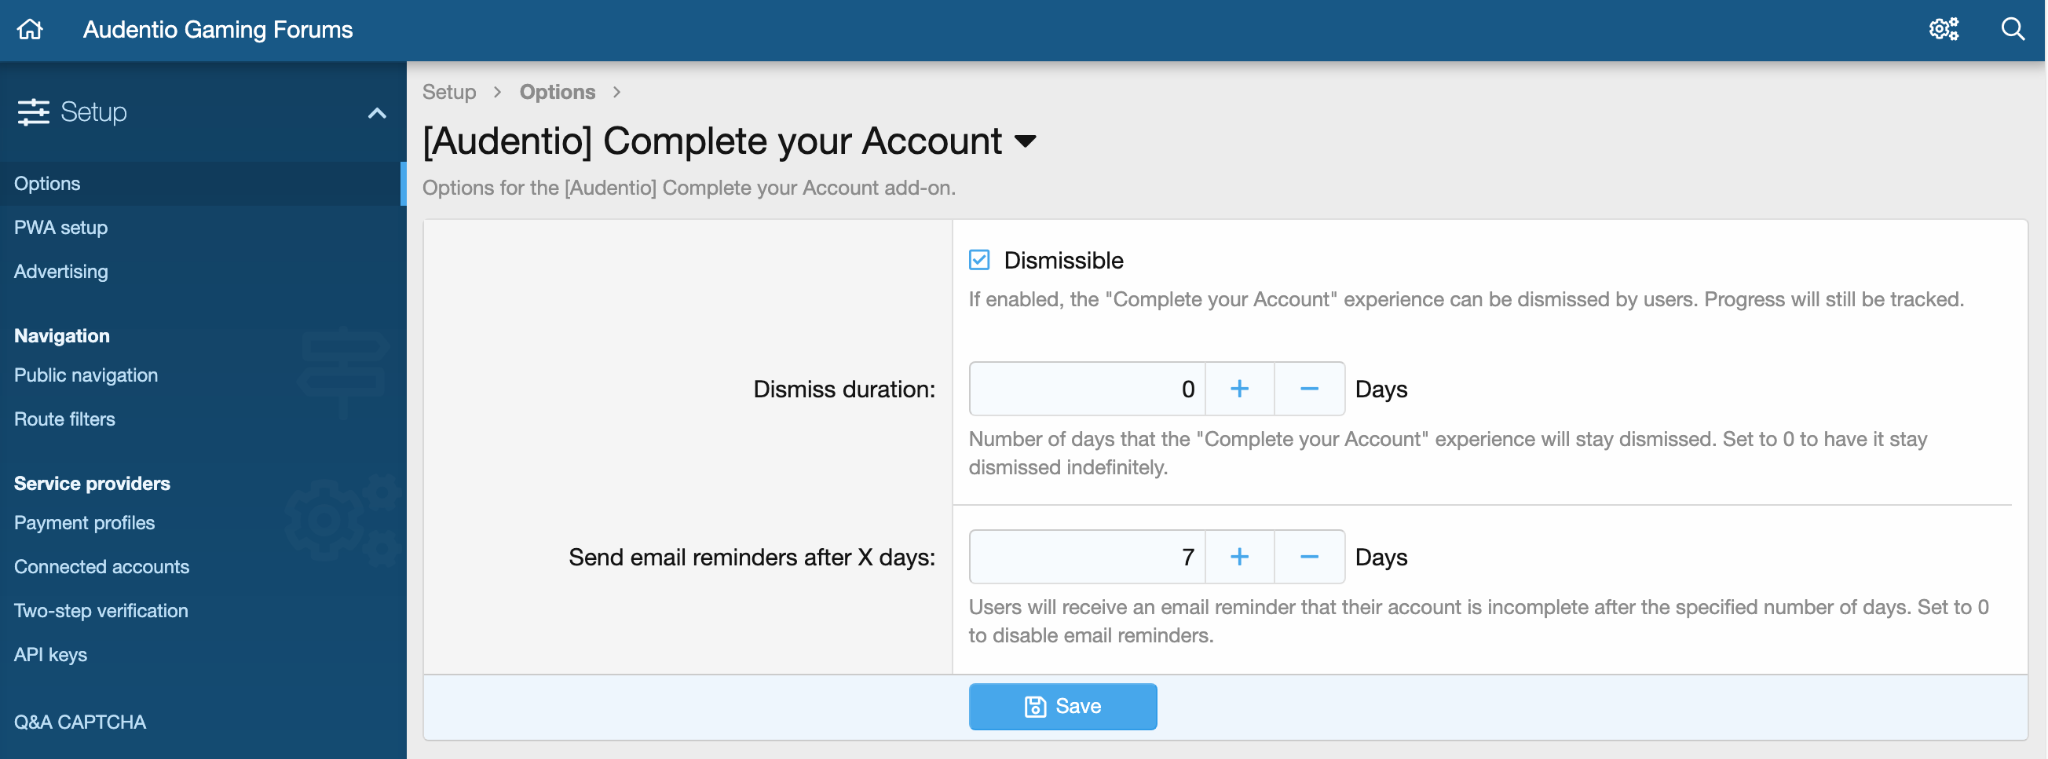  View of Complete Account options section in action 